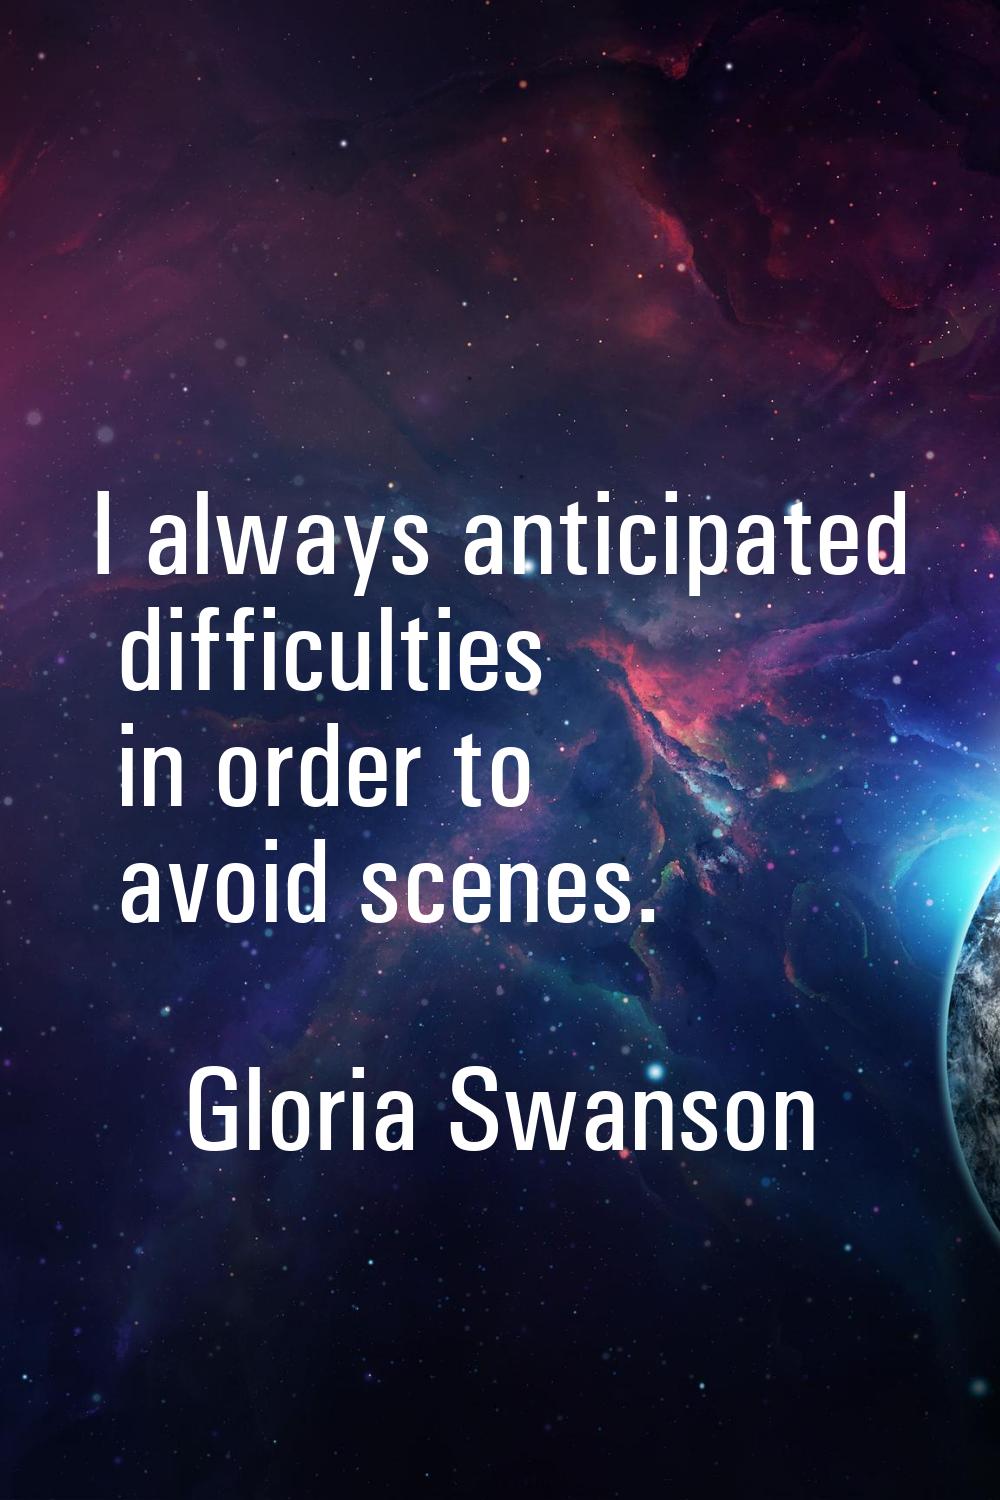 I always anticipated difficulties in order to avoid scenes.